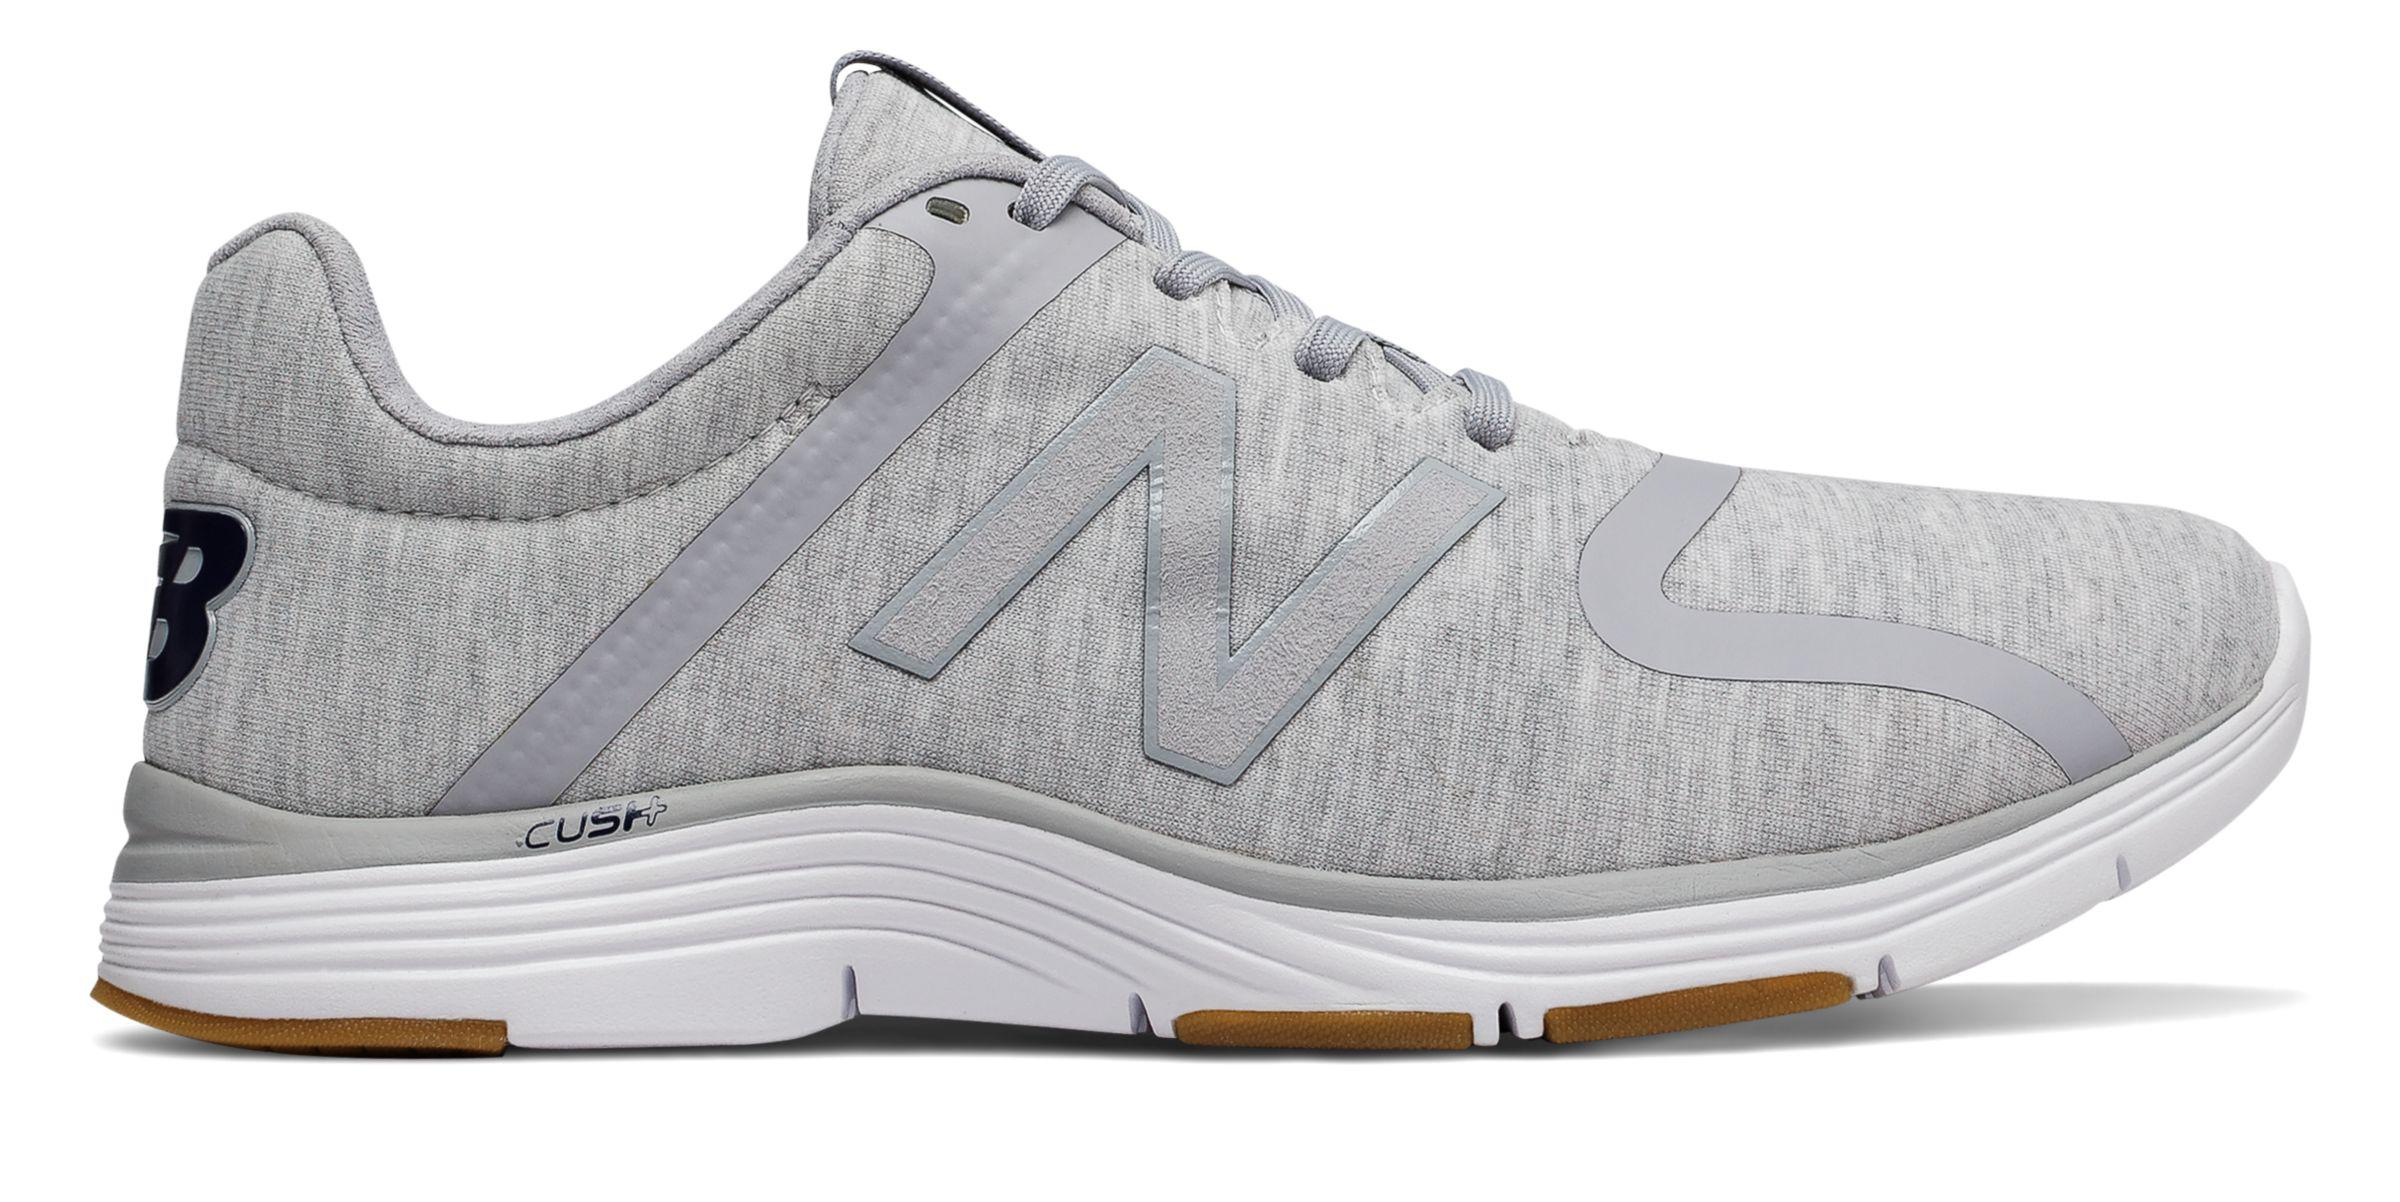 New Balance Synthetic 818v2 Trainer for Men - Lyst